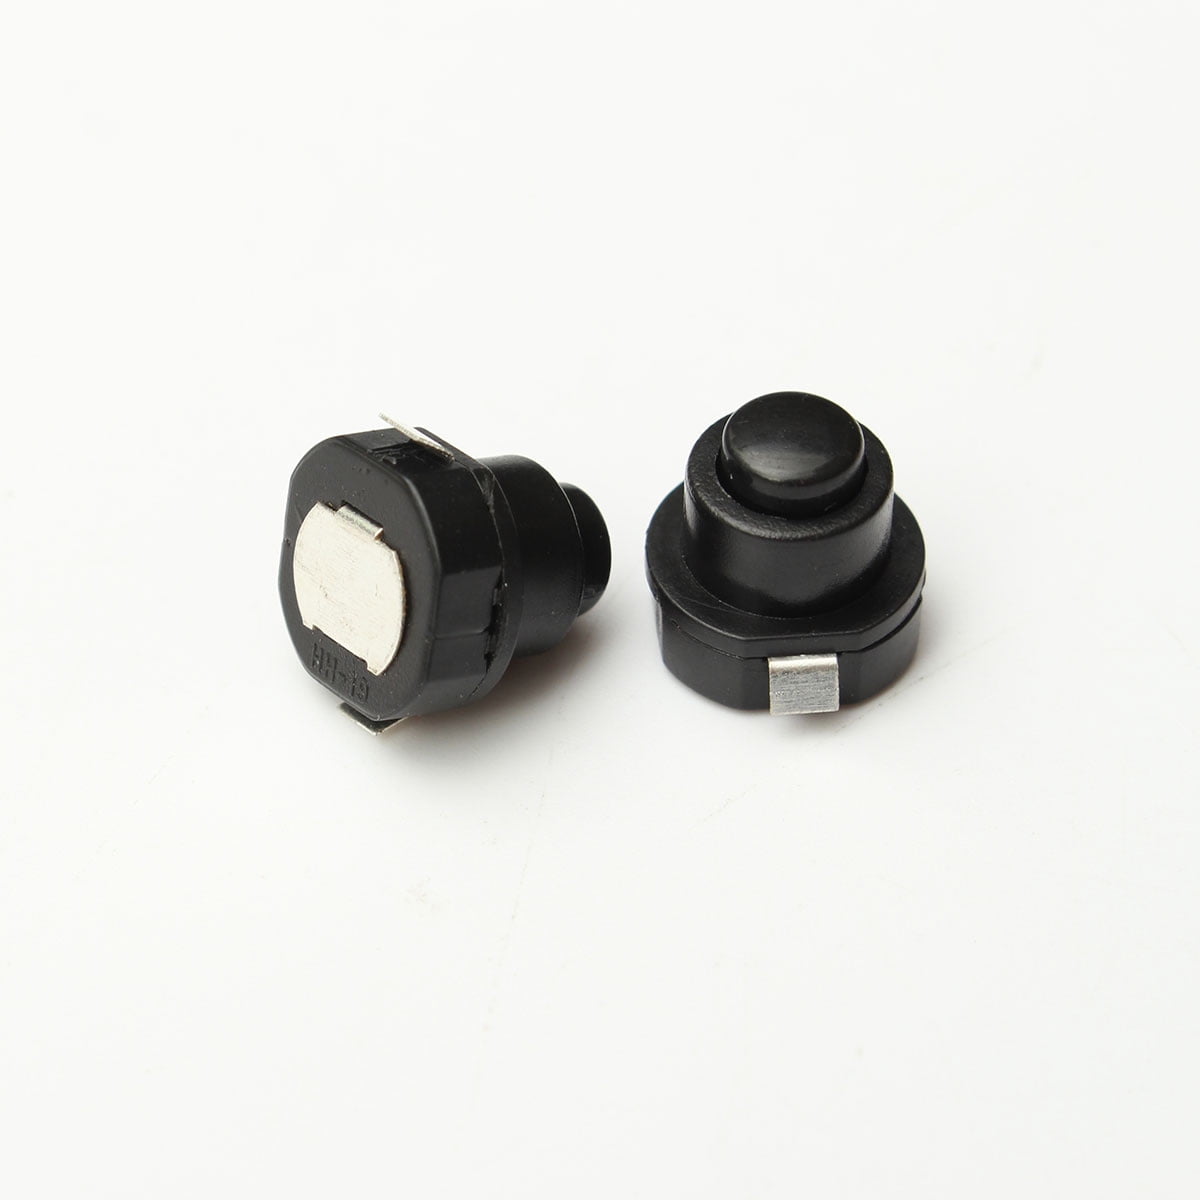 10x Round Push Button Click Switches Latching Black DC 30V 1A Diameter 3/8" 10mm 